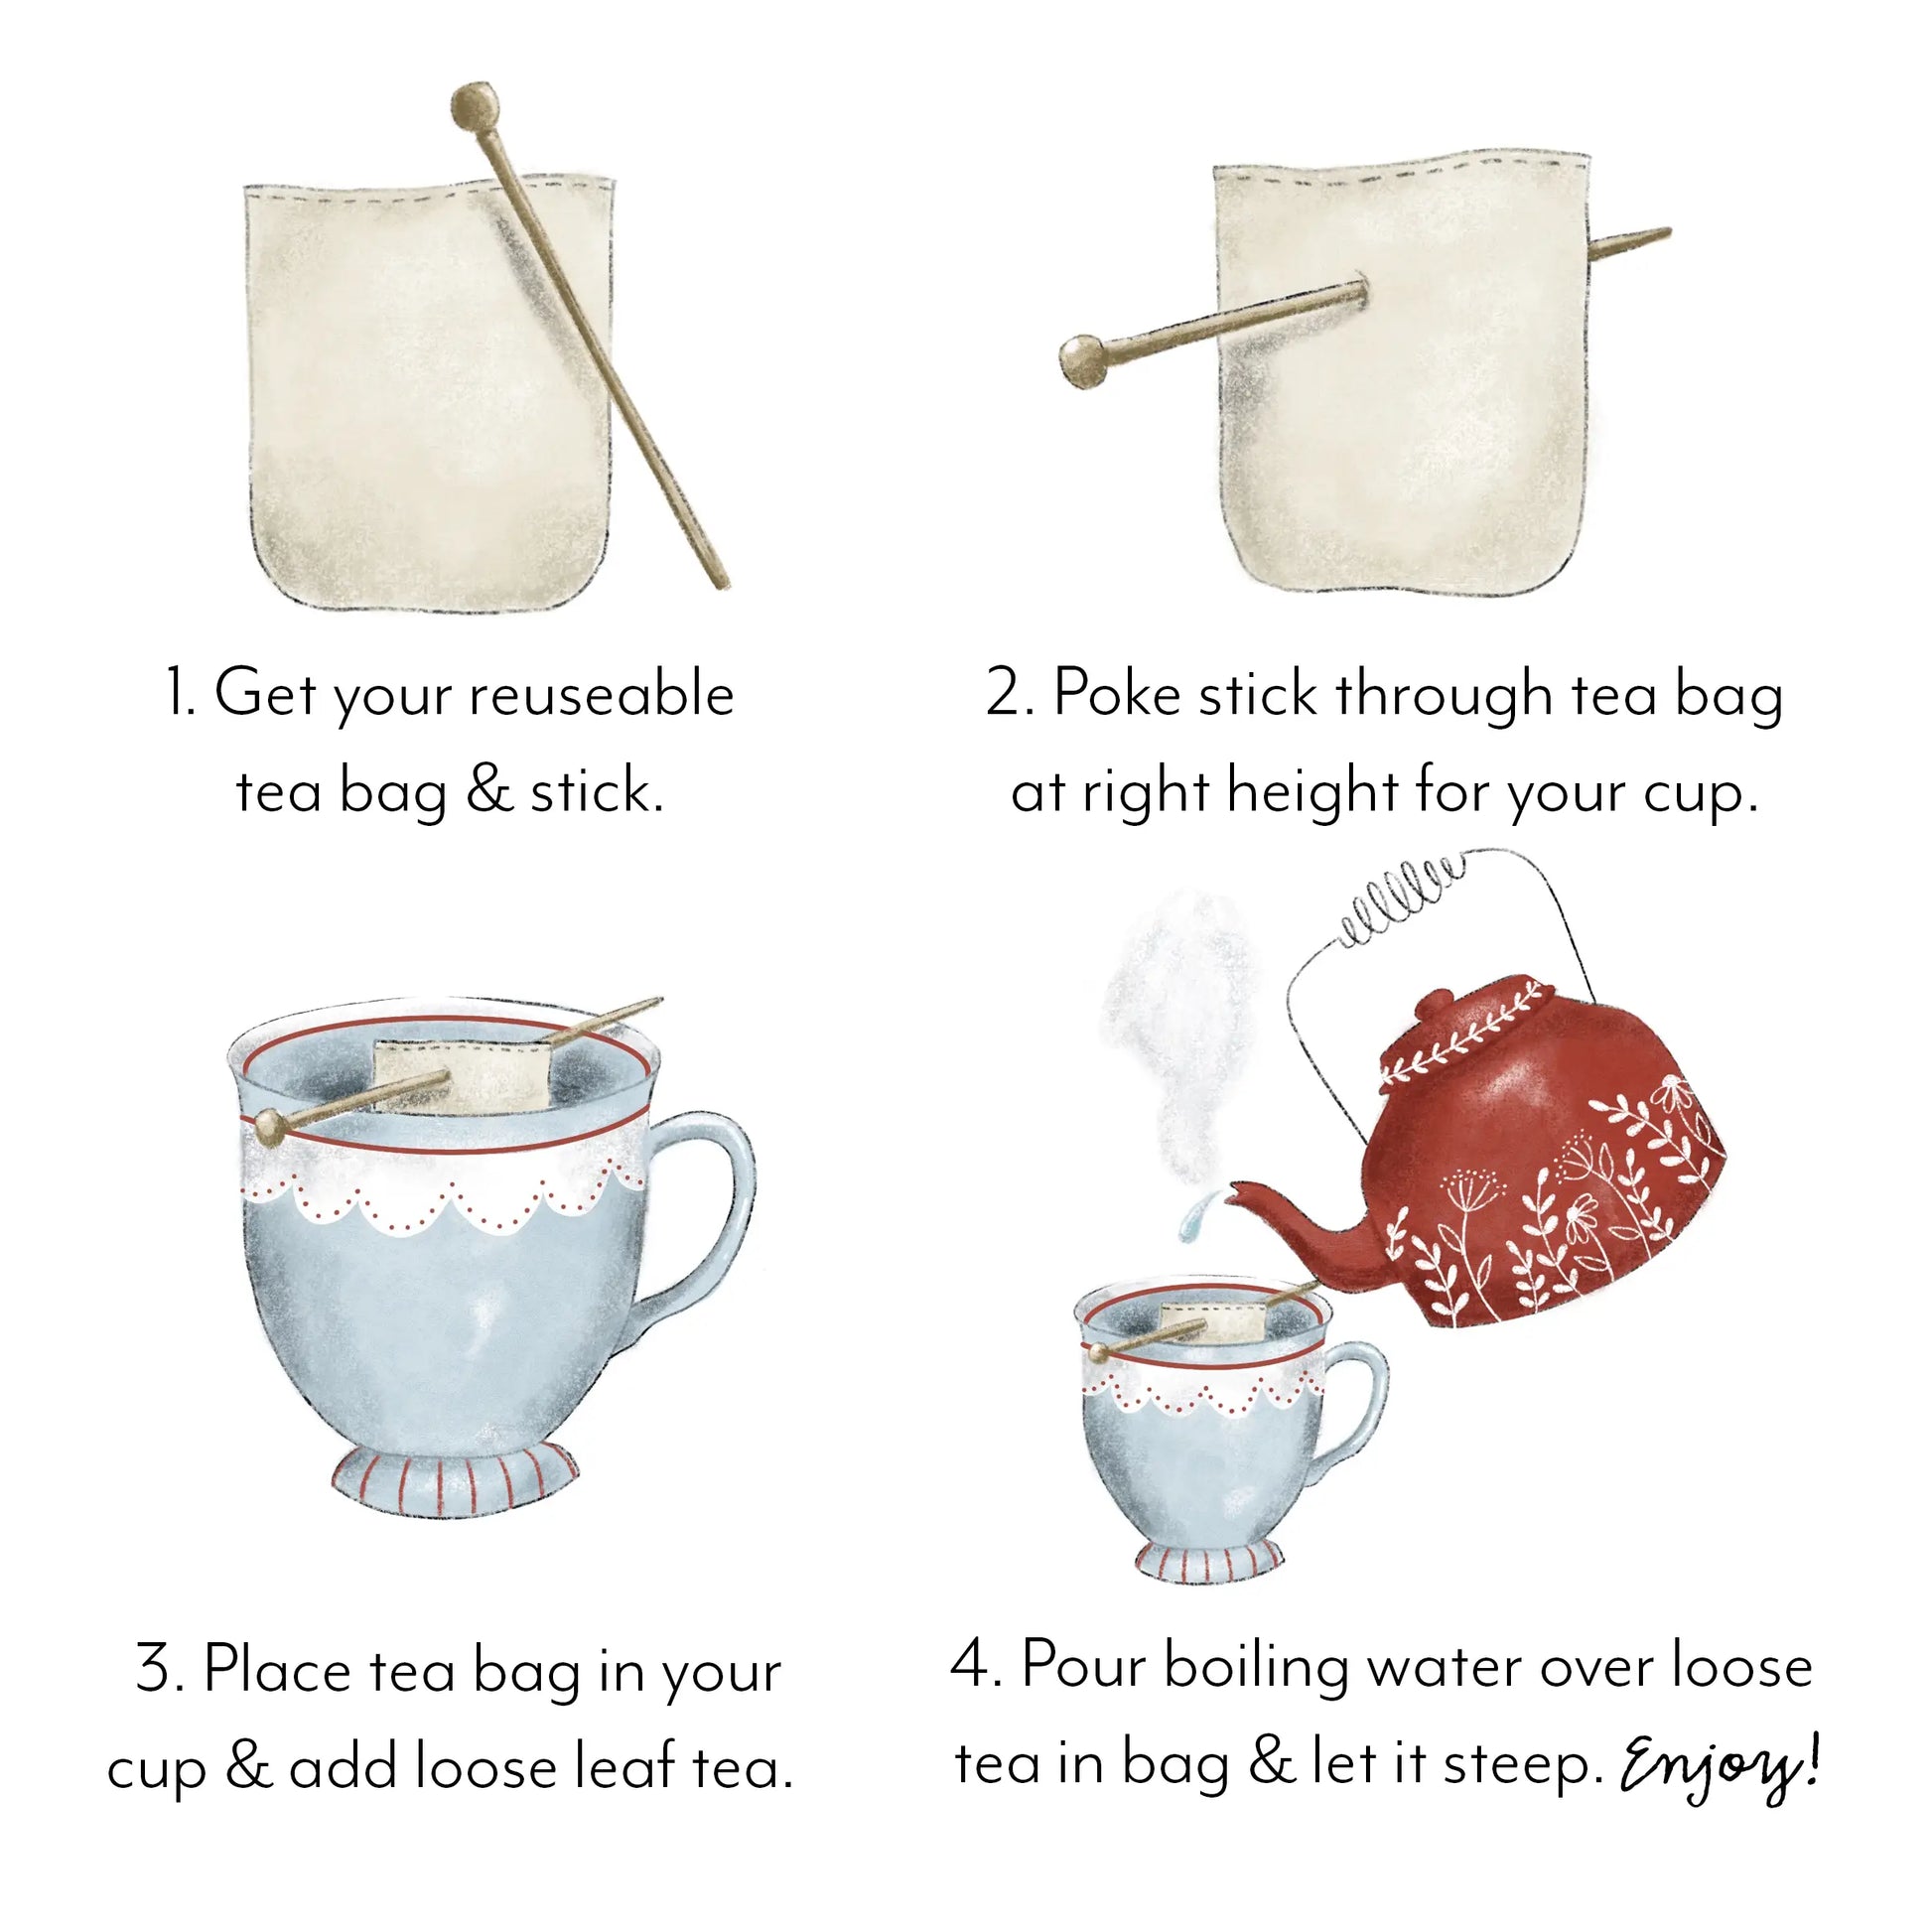 User instructions for how to use the tea bag. 